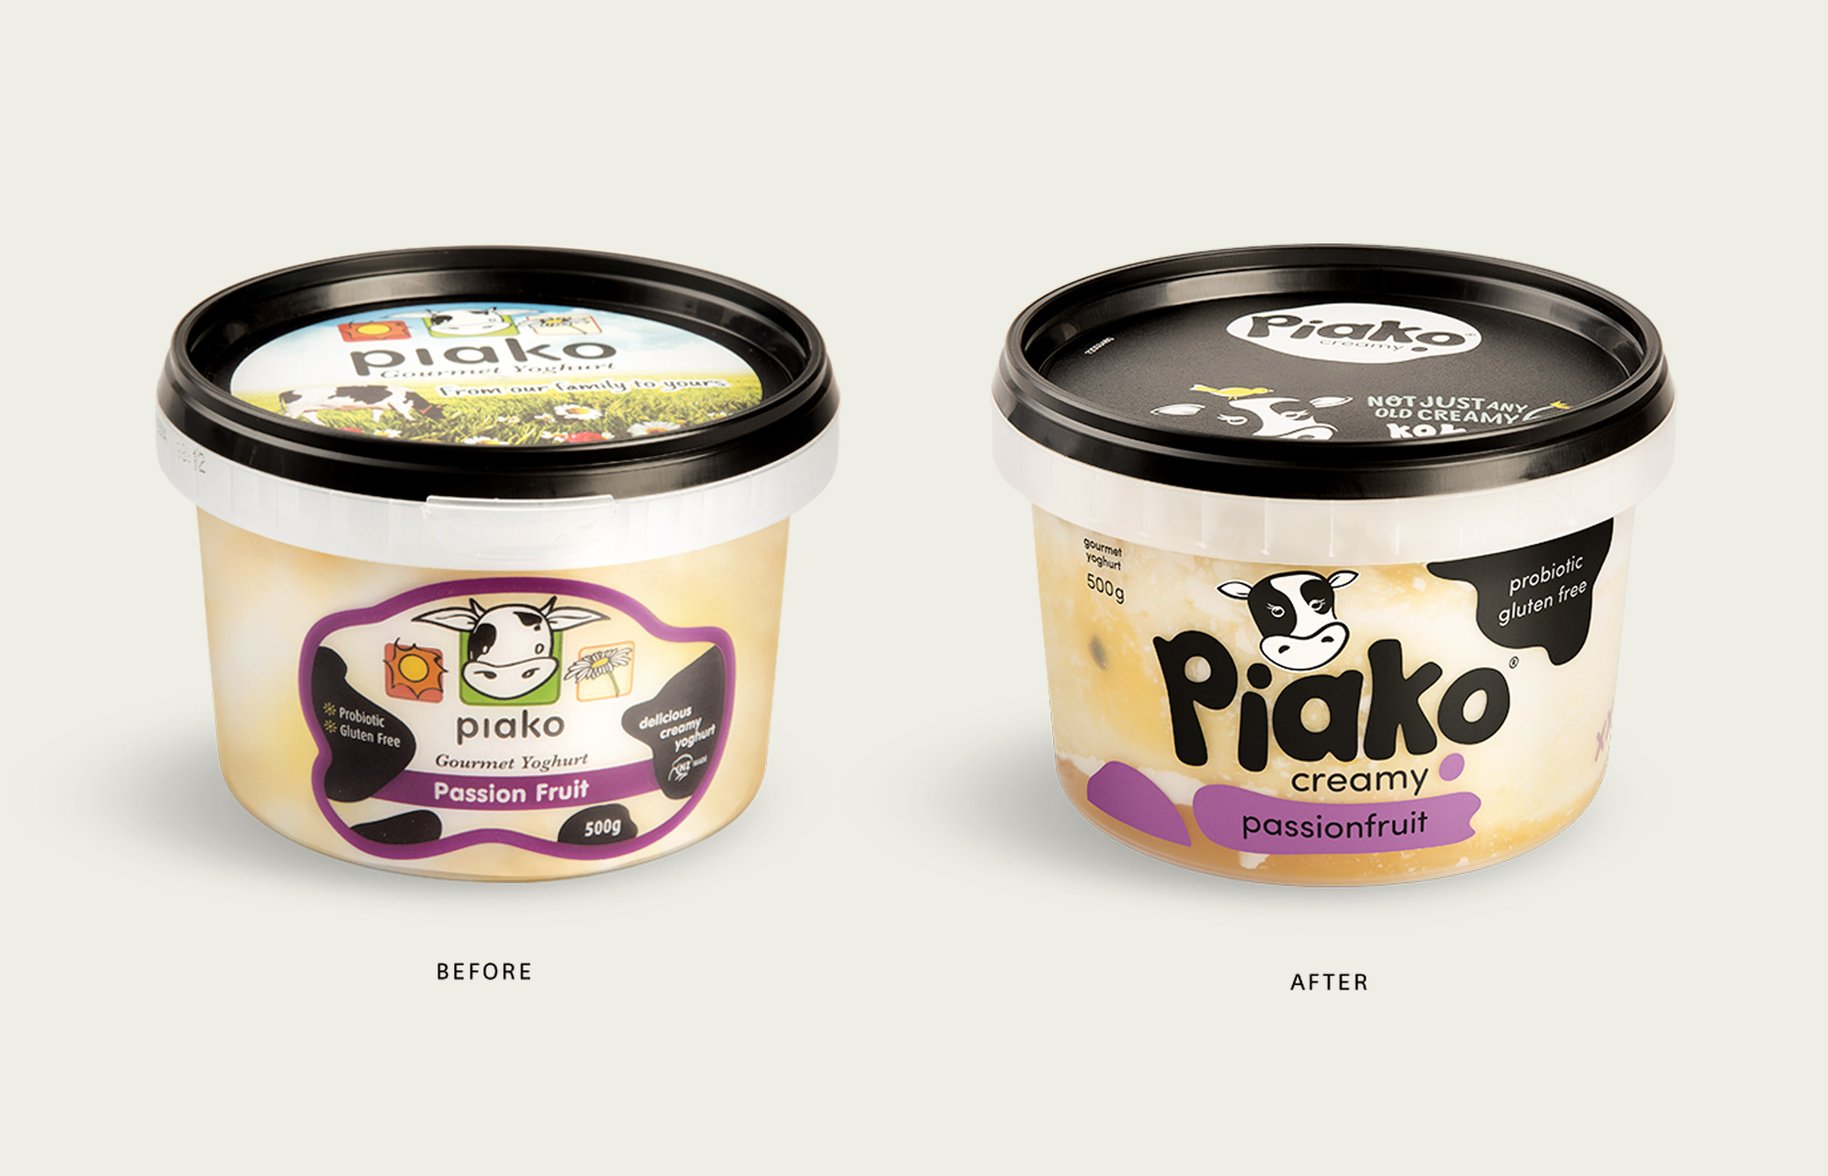 Piako Creamy yoghurt packaging before and after side